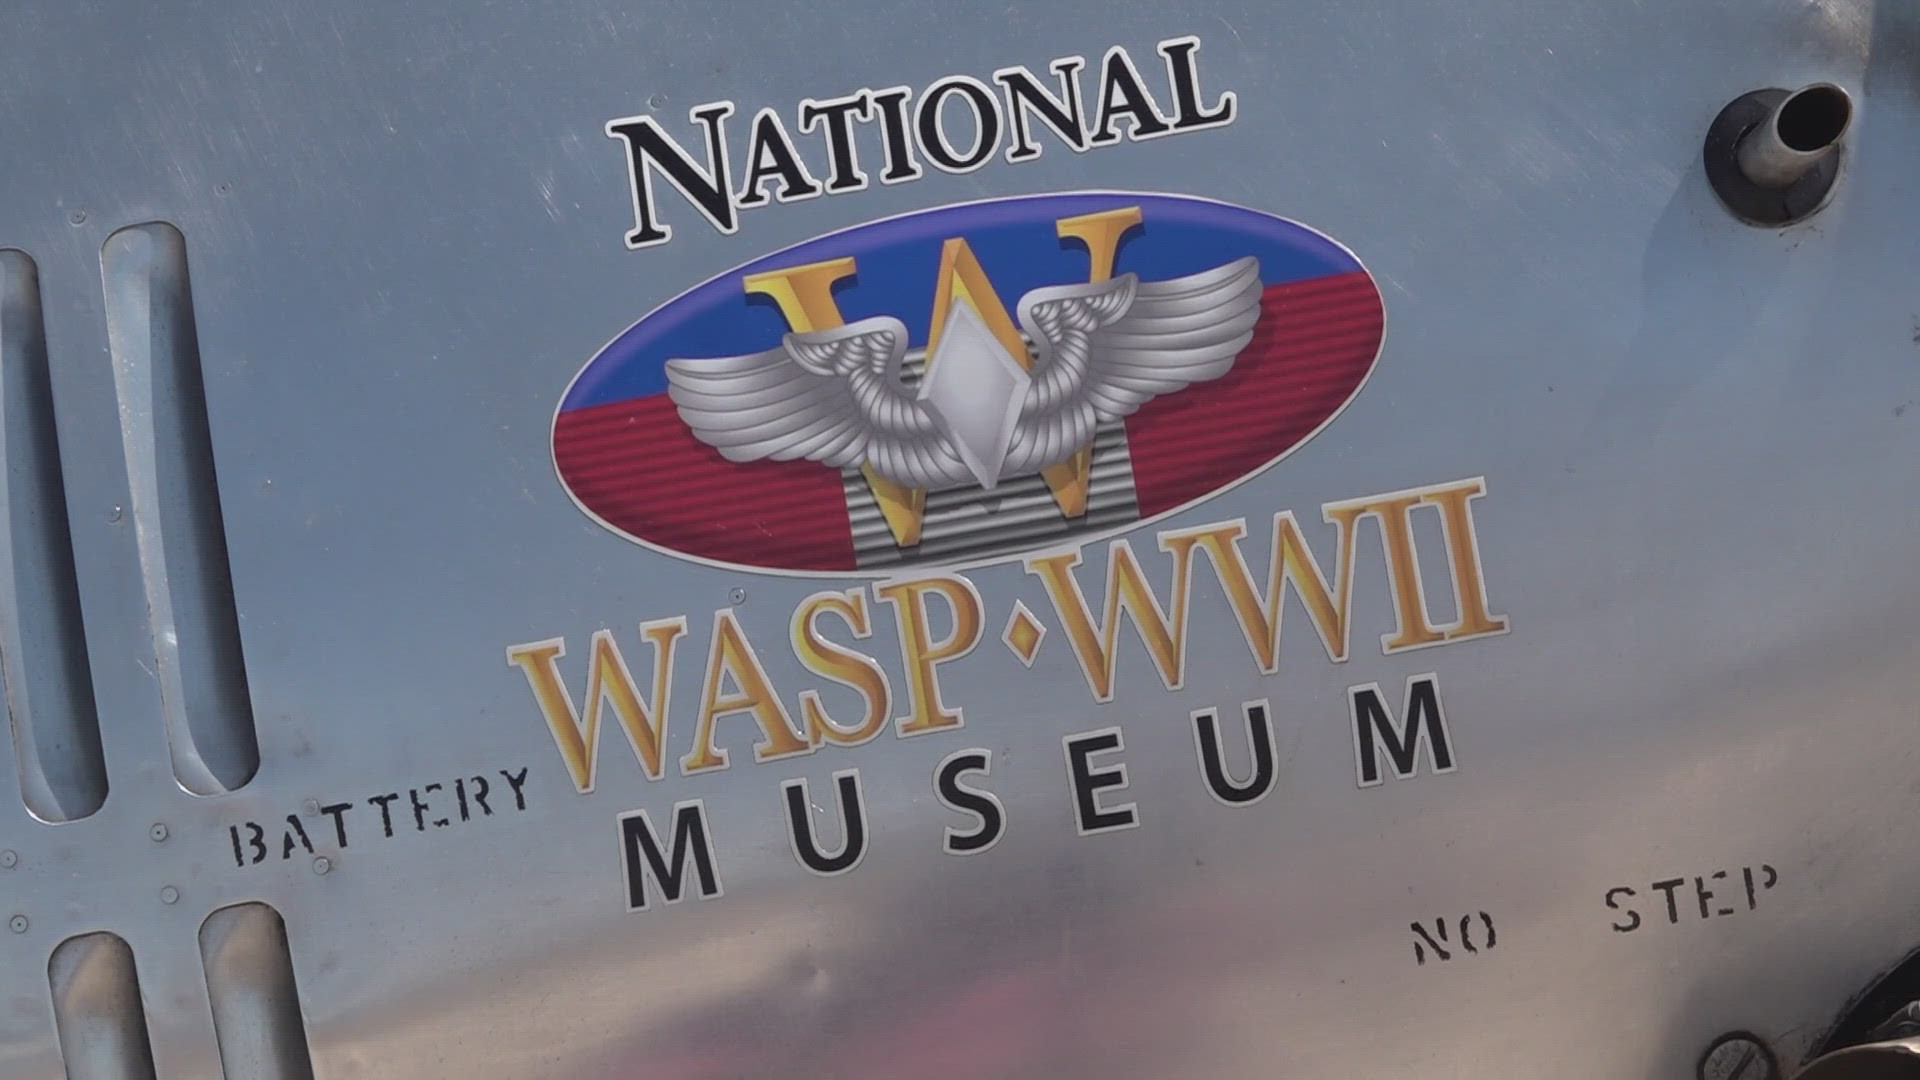 The Women Airforce Service Pilots museum flew in the 1942 BT-13 airplane. As "WASP" celebrates its 80th anniversary, the airplane will help keep their legacy alive.